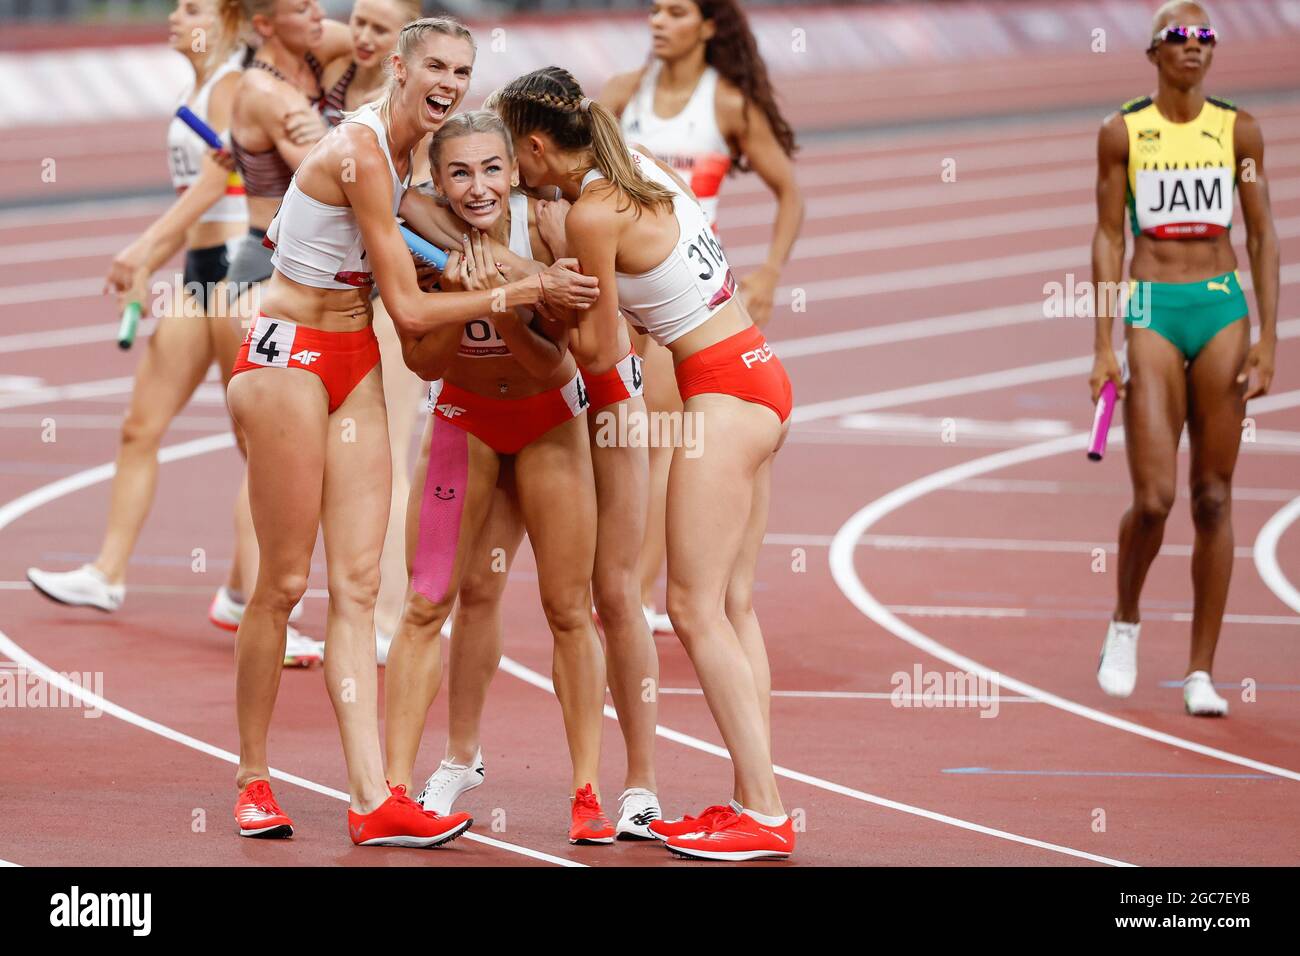 Tokyo, Japan. 07th Aug, 2021. Team Poland celebrates after winning silver in the Women's 4x400m final at Olympic Stadium during the 2020 Summer Olympics in Tokyo, Japan on Saturday, August 7, 2021. The United States took gold with a time of 3:16.85 while Poland took silver with a time of 3:20.53 and Jamaica taking bronze with a time of 3:21.24. Photo by Tasos Katopodis/UPI Credit: UPI/Alamy Live News Stock Photo